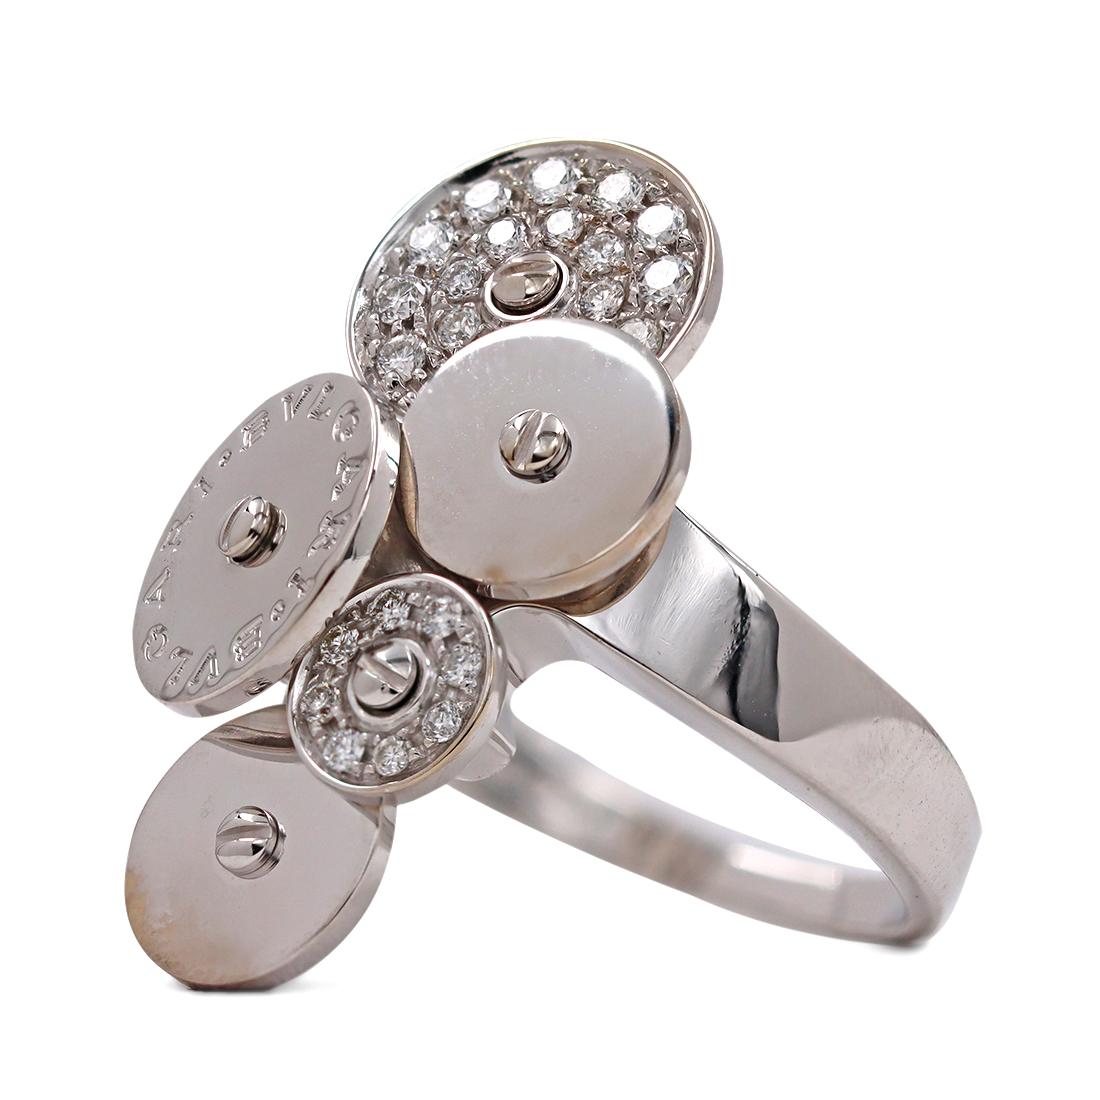 Authentic Bvlgari 'Cicladi' ring crafted in 18 karat white gold. The ring is composed of a cluster of 5 spinning circular discs of various size, including 3 discs that are encrusted in round brilliant cut diamonds for an estimated 0.20 carats total